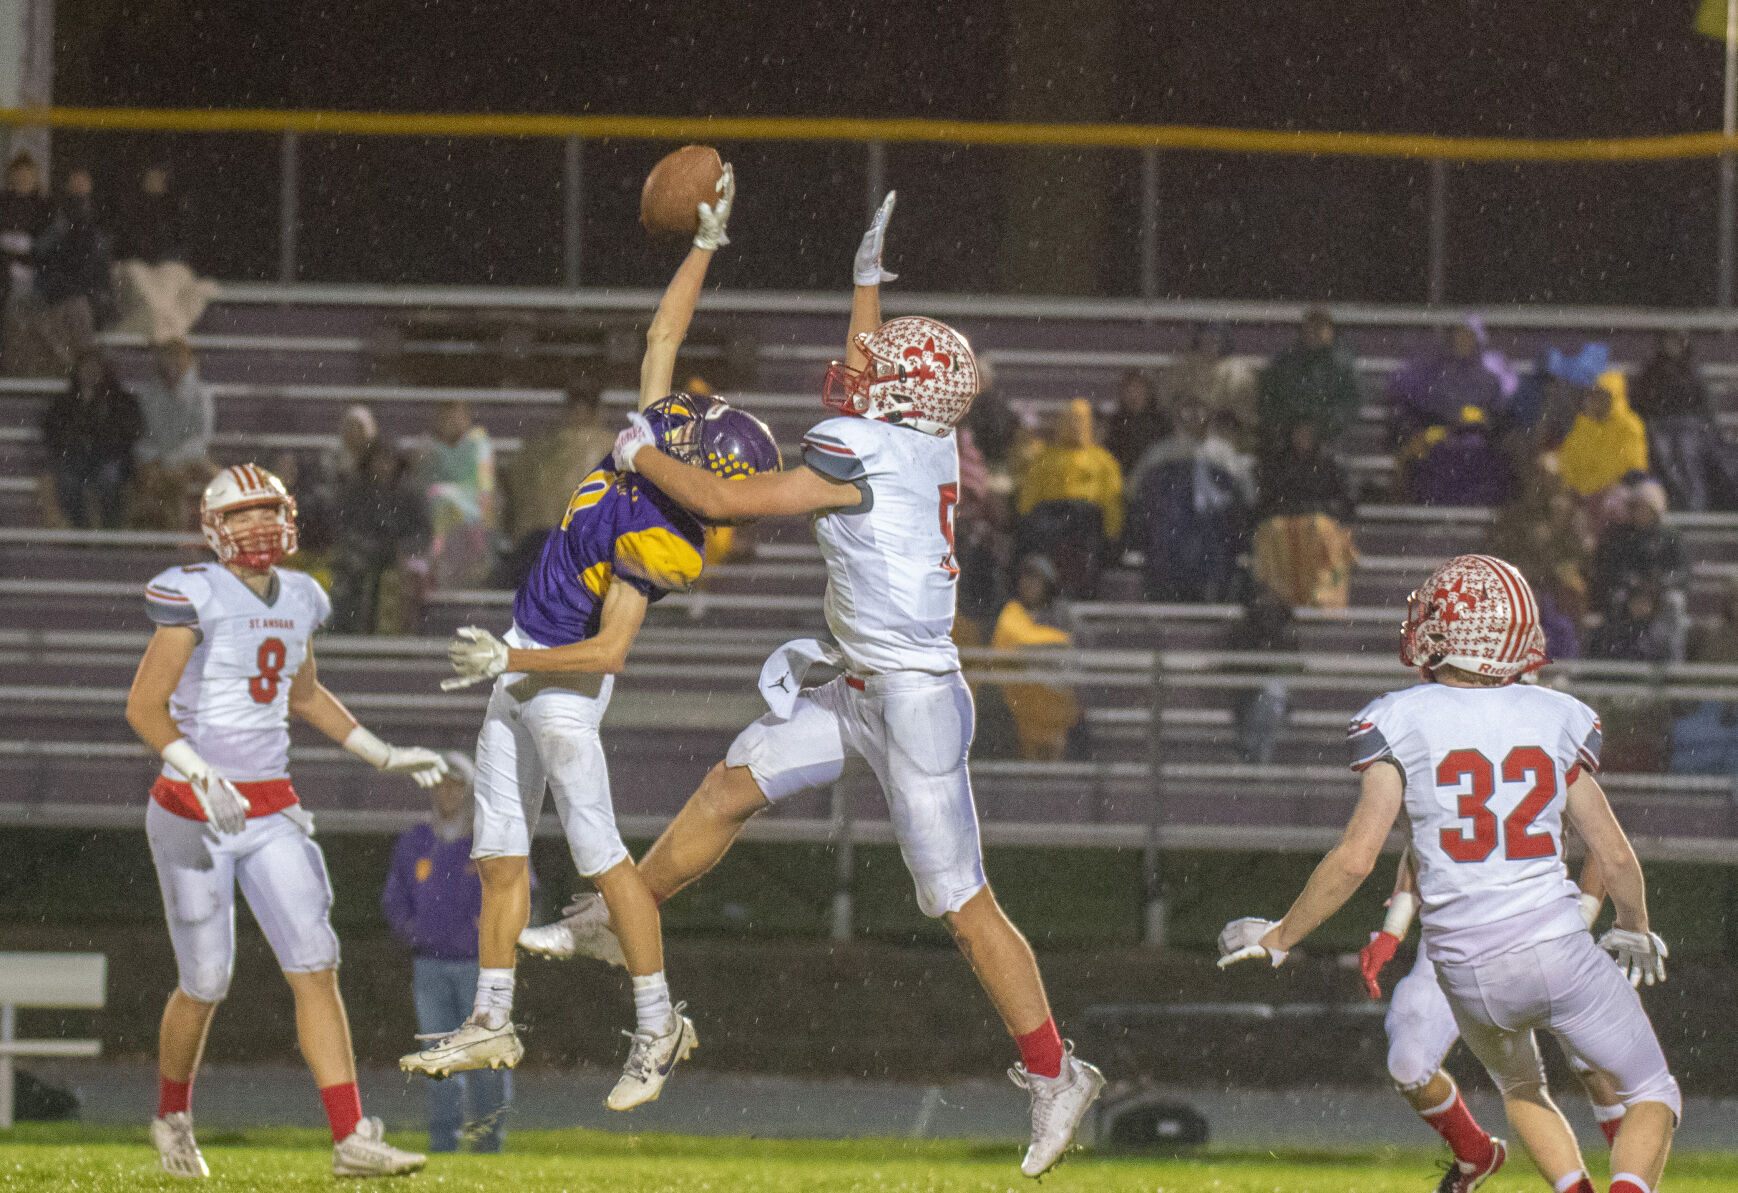 High School Football: Scores from Friday night’s playoff games